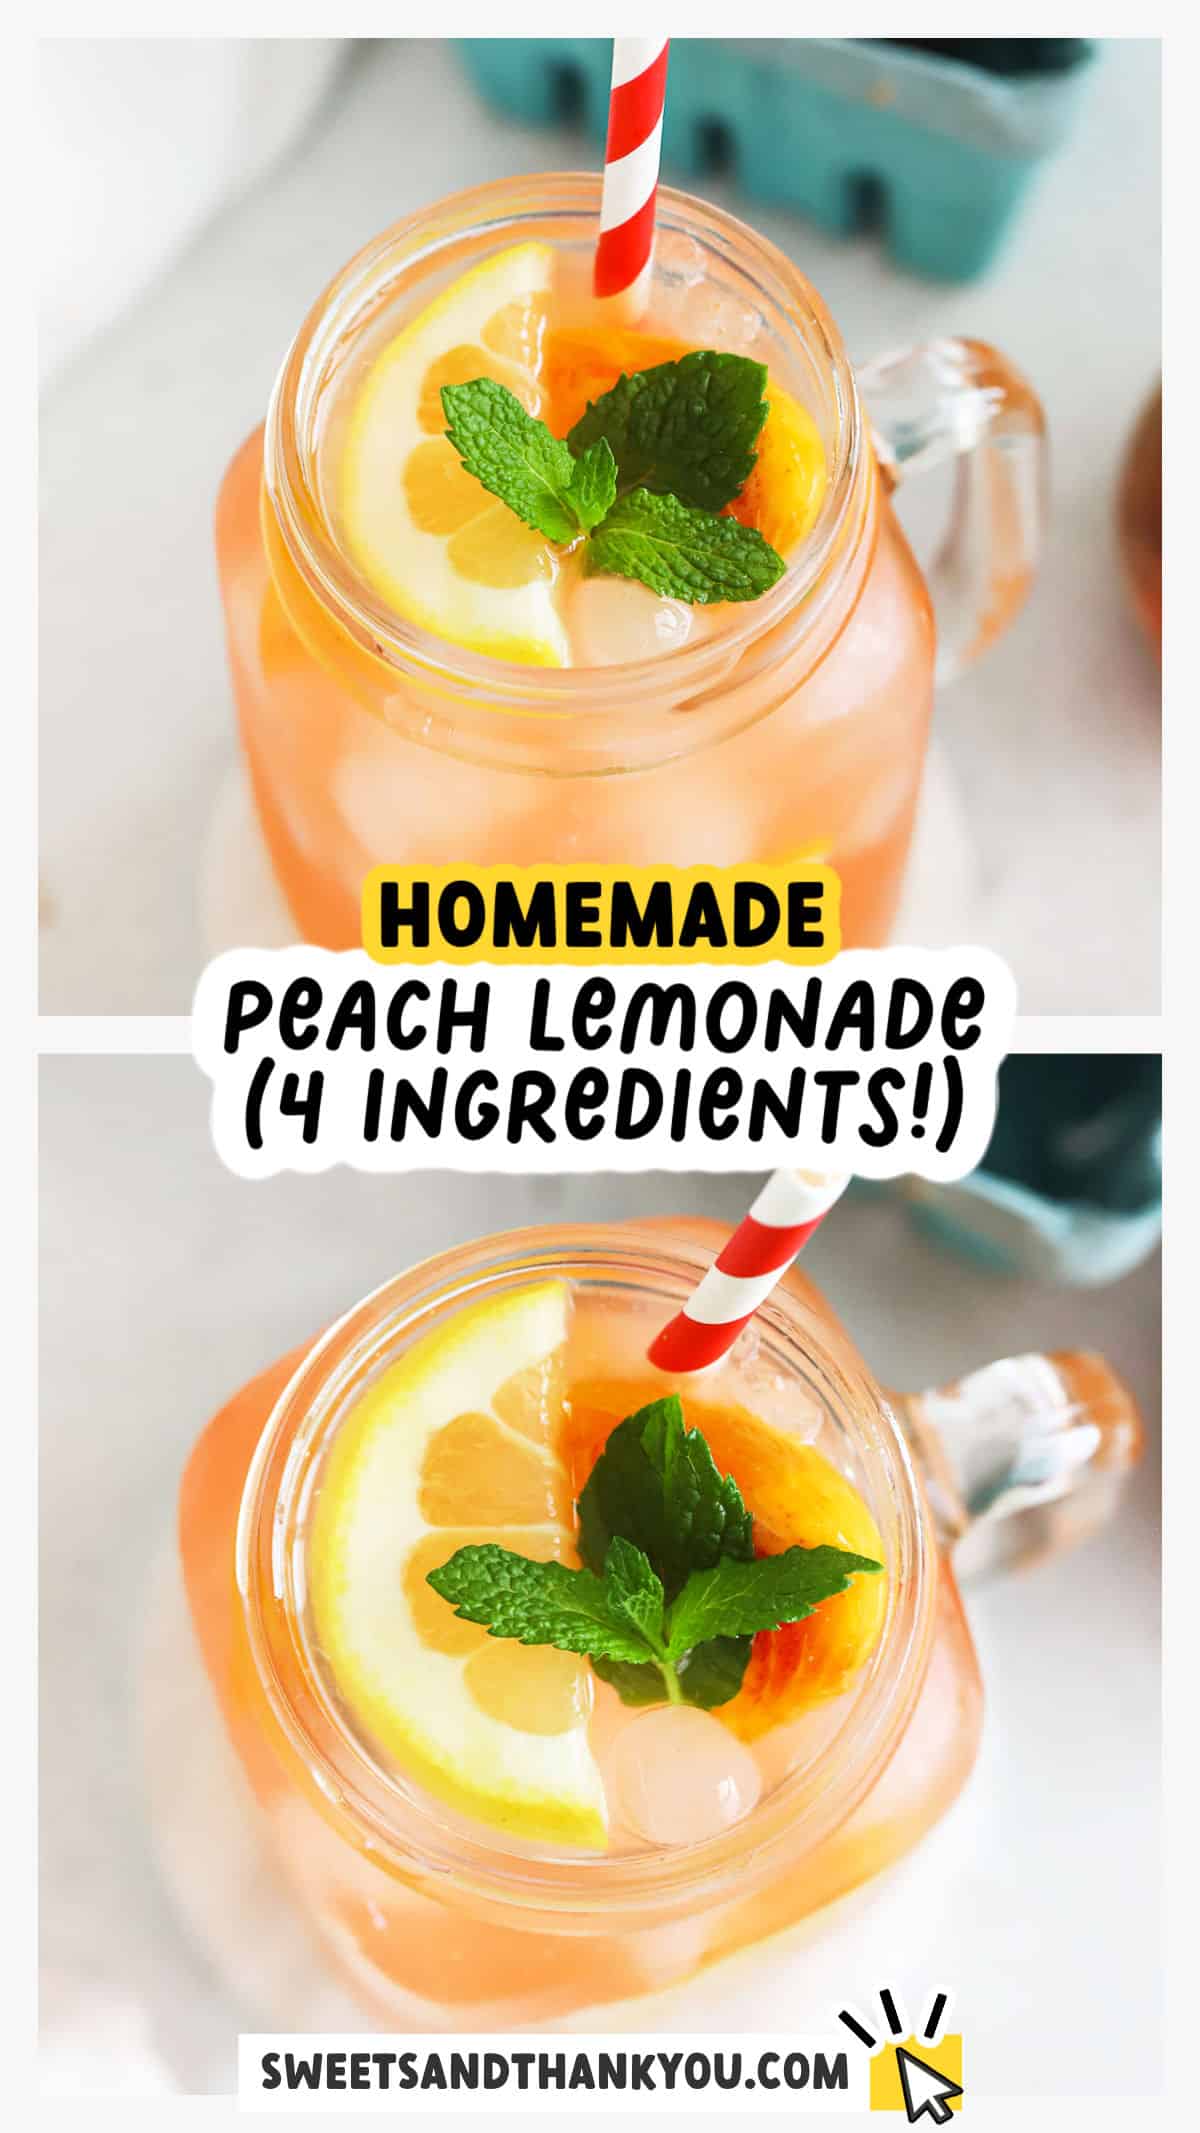 This easy homemade peach lemonade recipe is made with fresh (or frozen!) peaches and lemon juice to make a light, refreshing summer drink recipe you won't want to miss. Once you've tried peach lemonade from scratch you won't want to go back! Get this homemade lemonade recipe and more variations to try at sweetsandthankyou.com